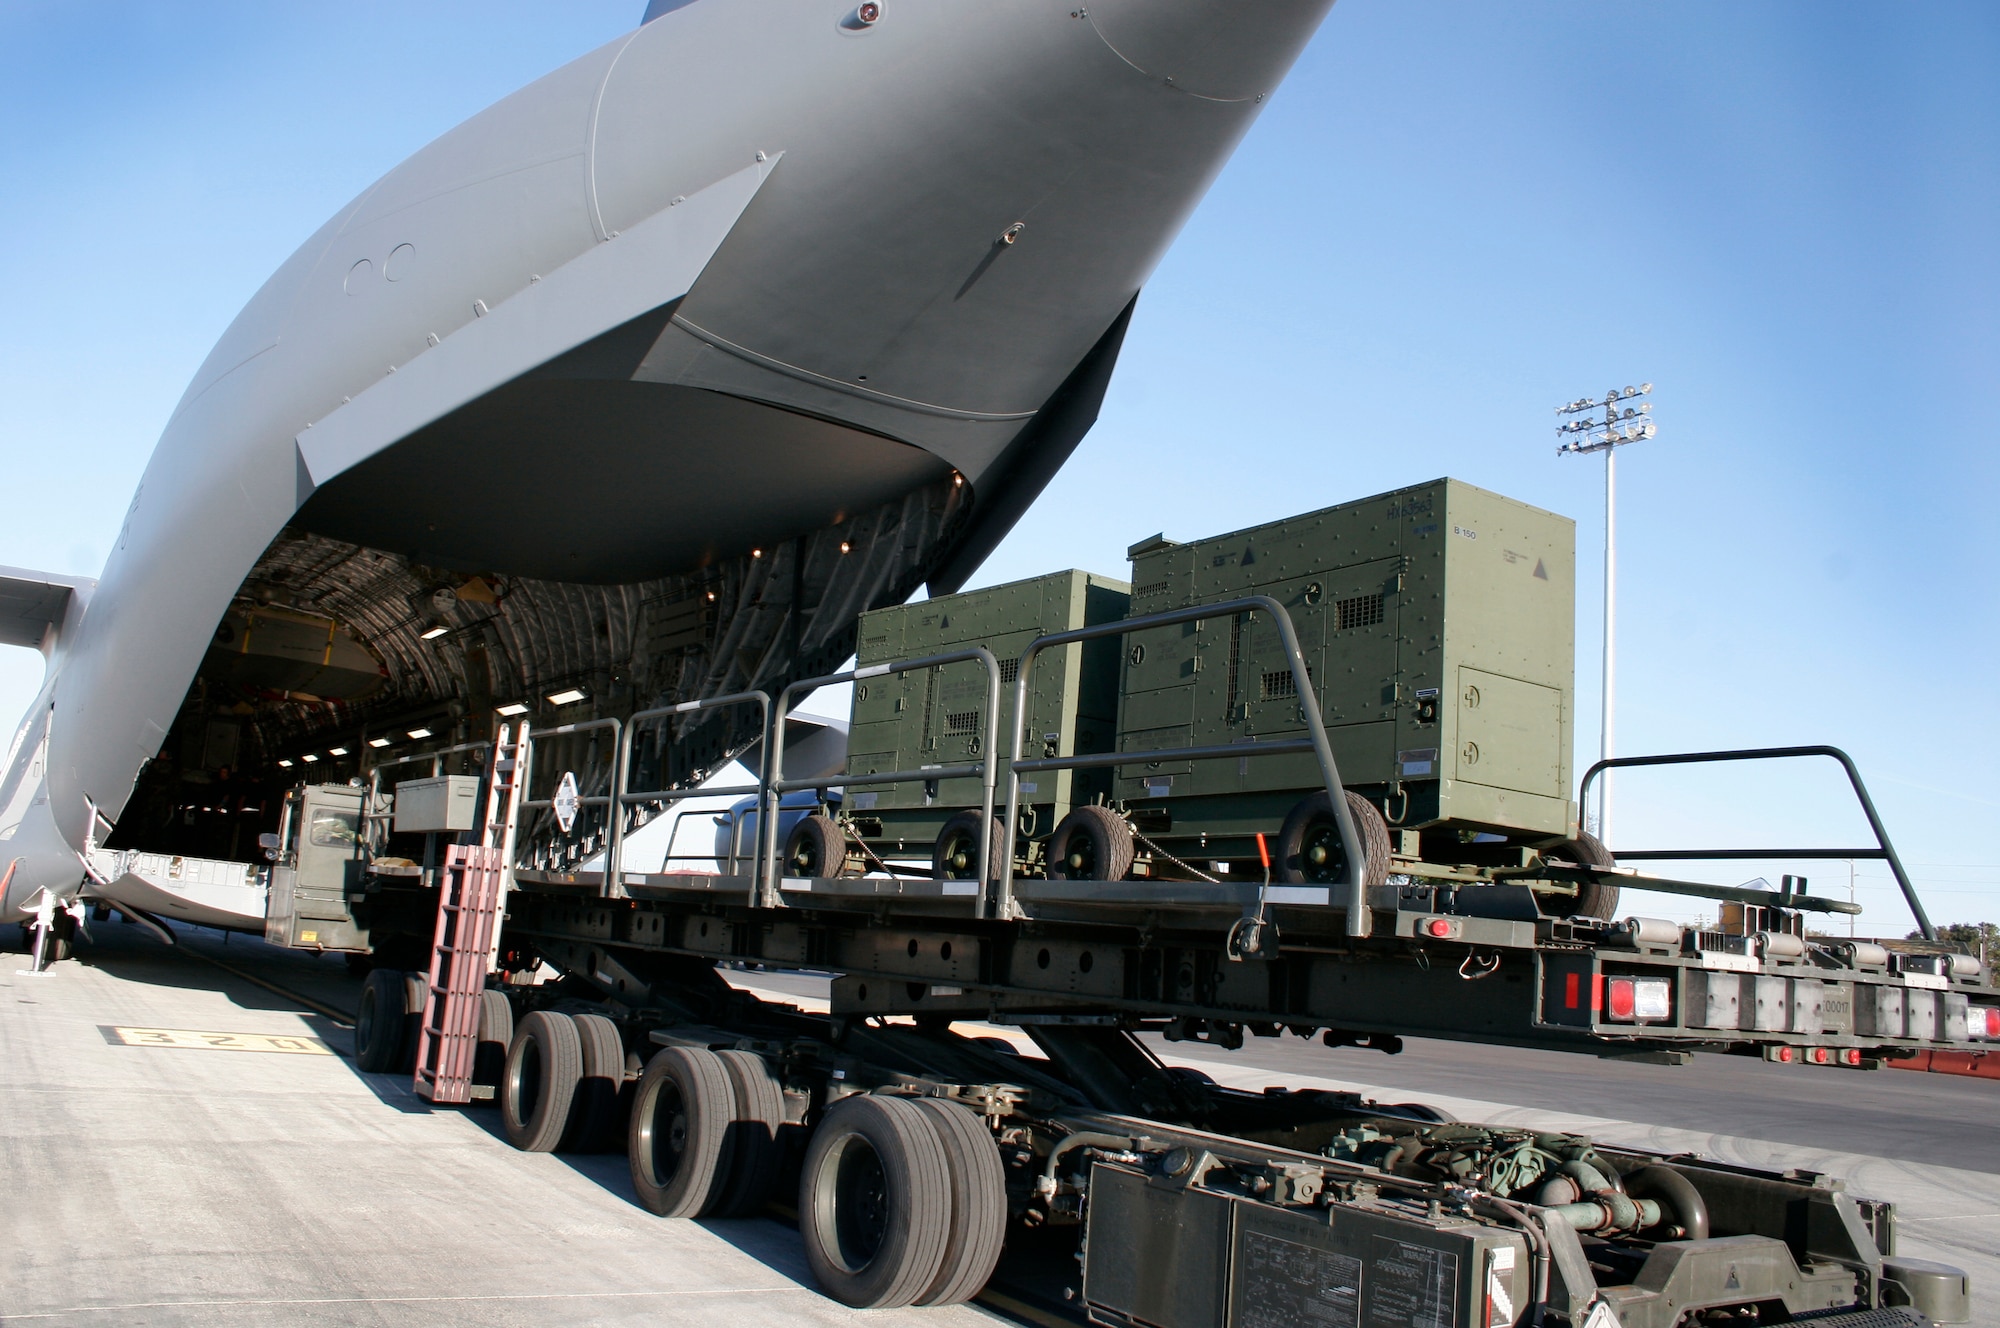 A C-17 Globemaster III is ready to receive two generators off a 60,000 pound loader during the Crisis Look 07-02 deployment exercise held on Travis Air Force Base, Calif. (U. S. Air Force photo Laura Fentress)